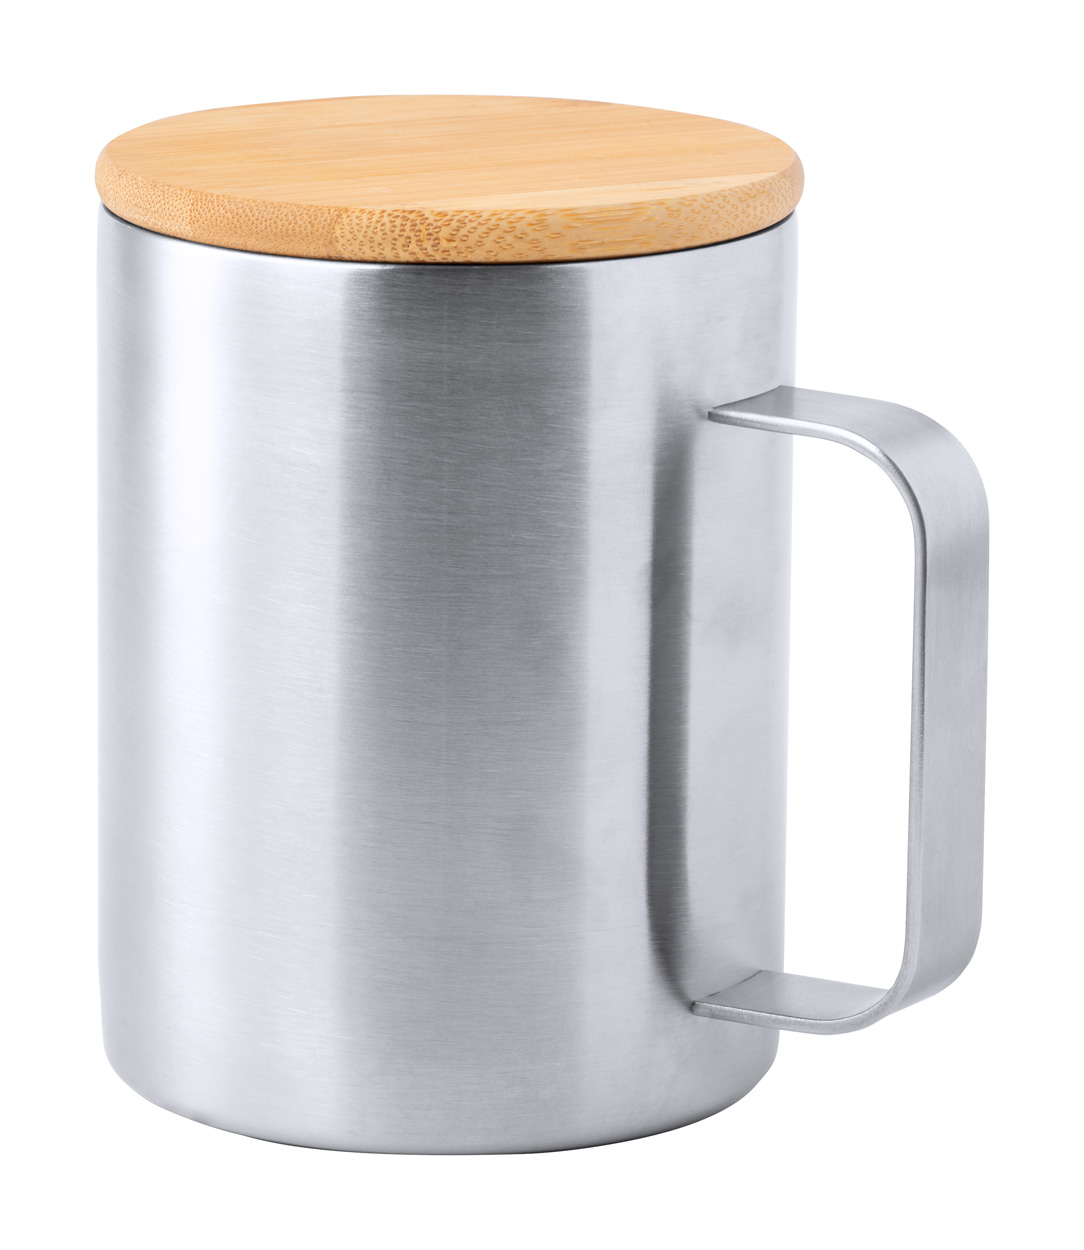 Ricaly stainless steel mug - silver